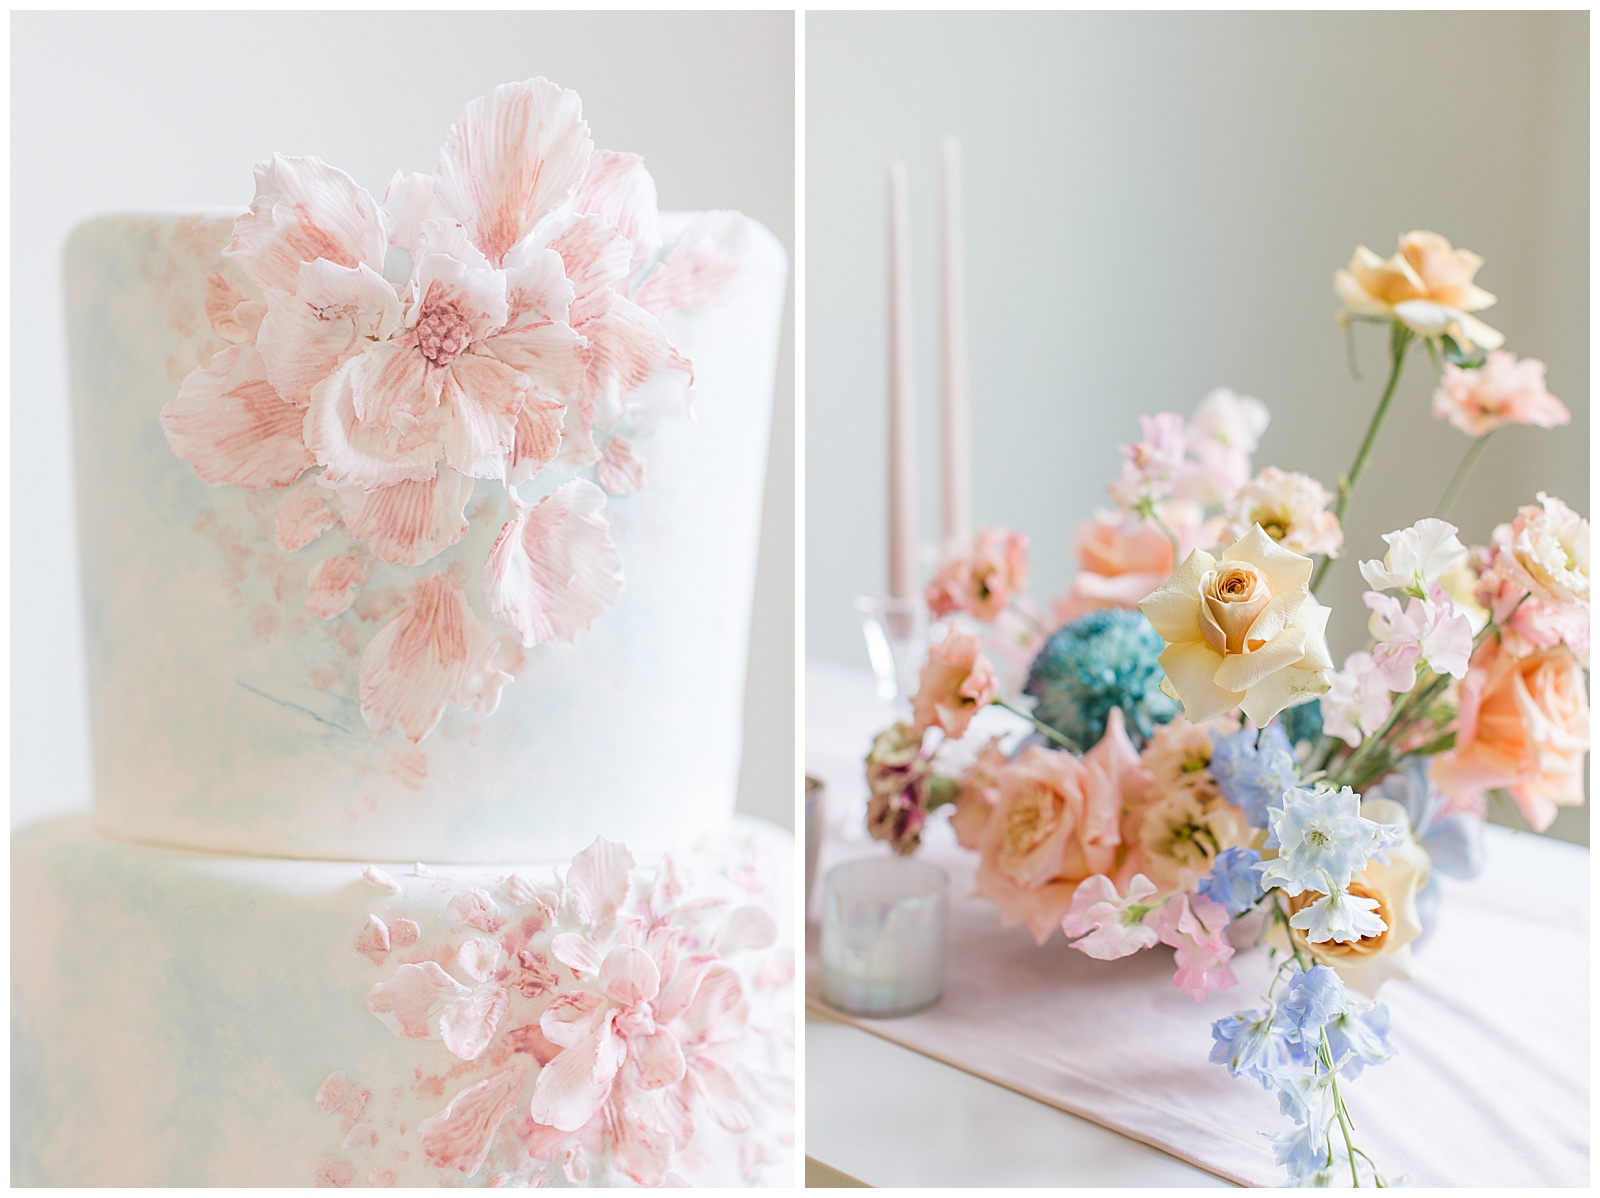 Pastel Themed Spring Wedding at Park Chateua in New Jersey by Jocelyn Cruz Photography. Planning by Heather Bengee Events. Stationary by Emily Williams Design. Cake by Duchess of Desserts.